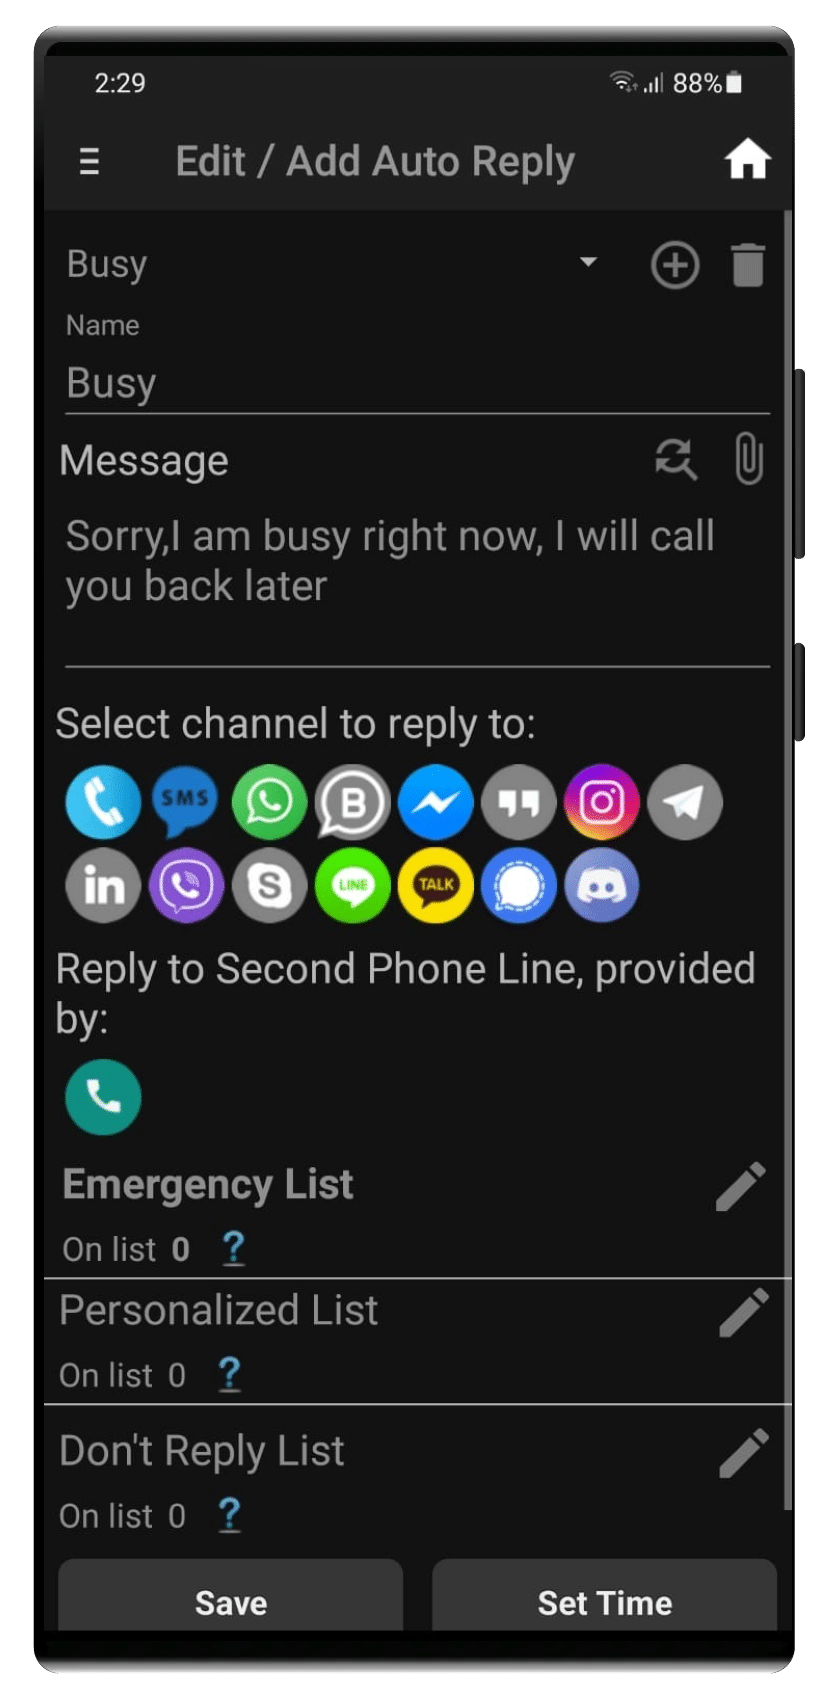 SMS Auto Reply for Missed Calls App